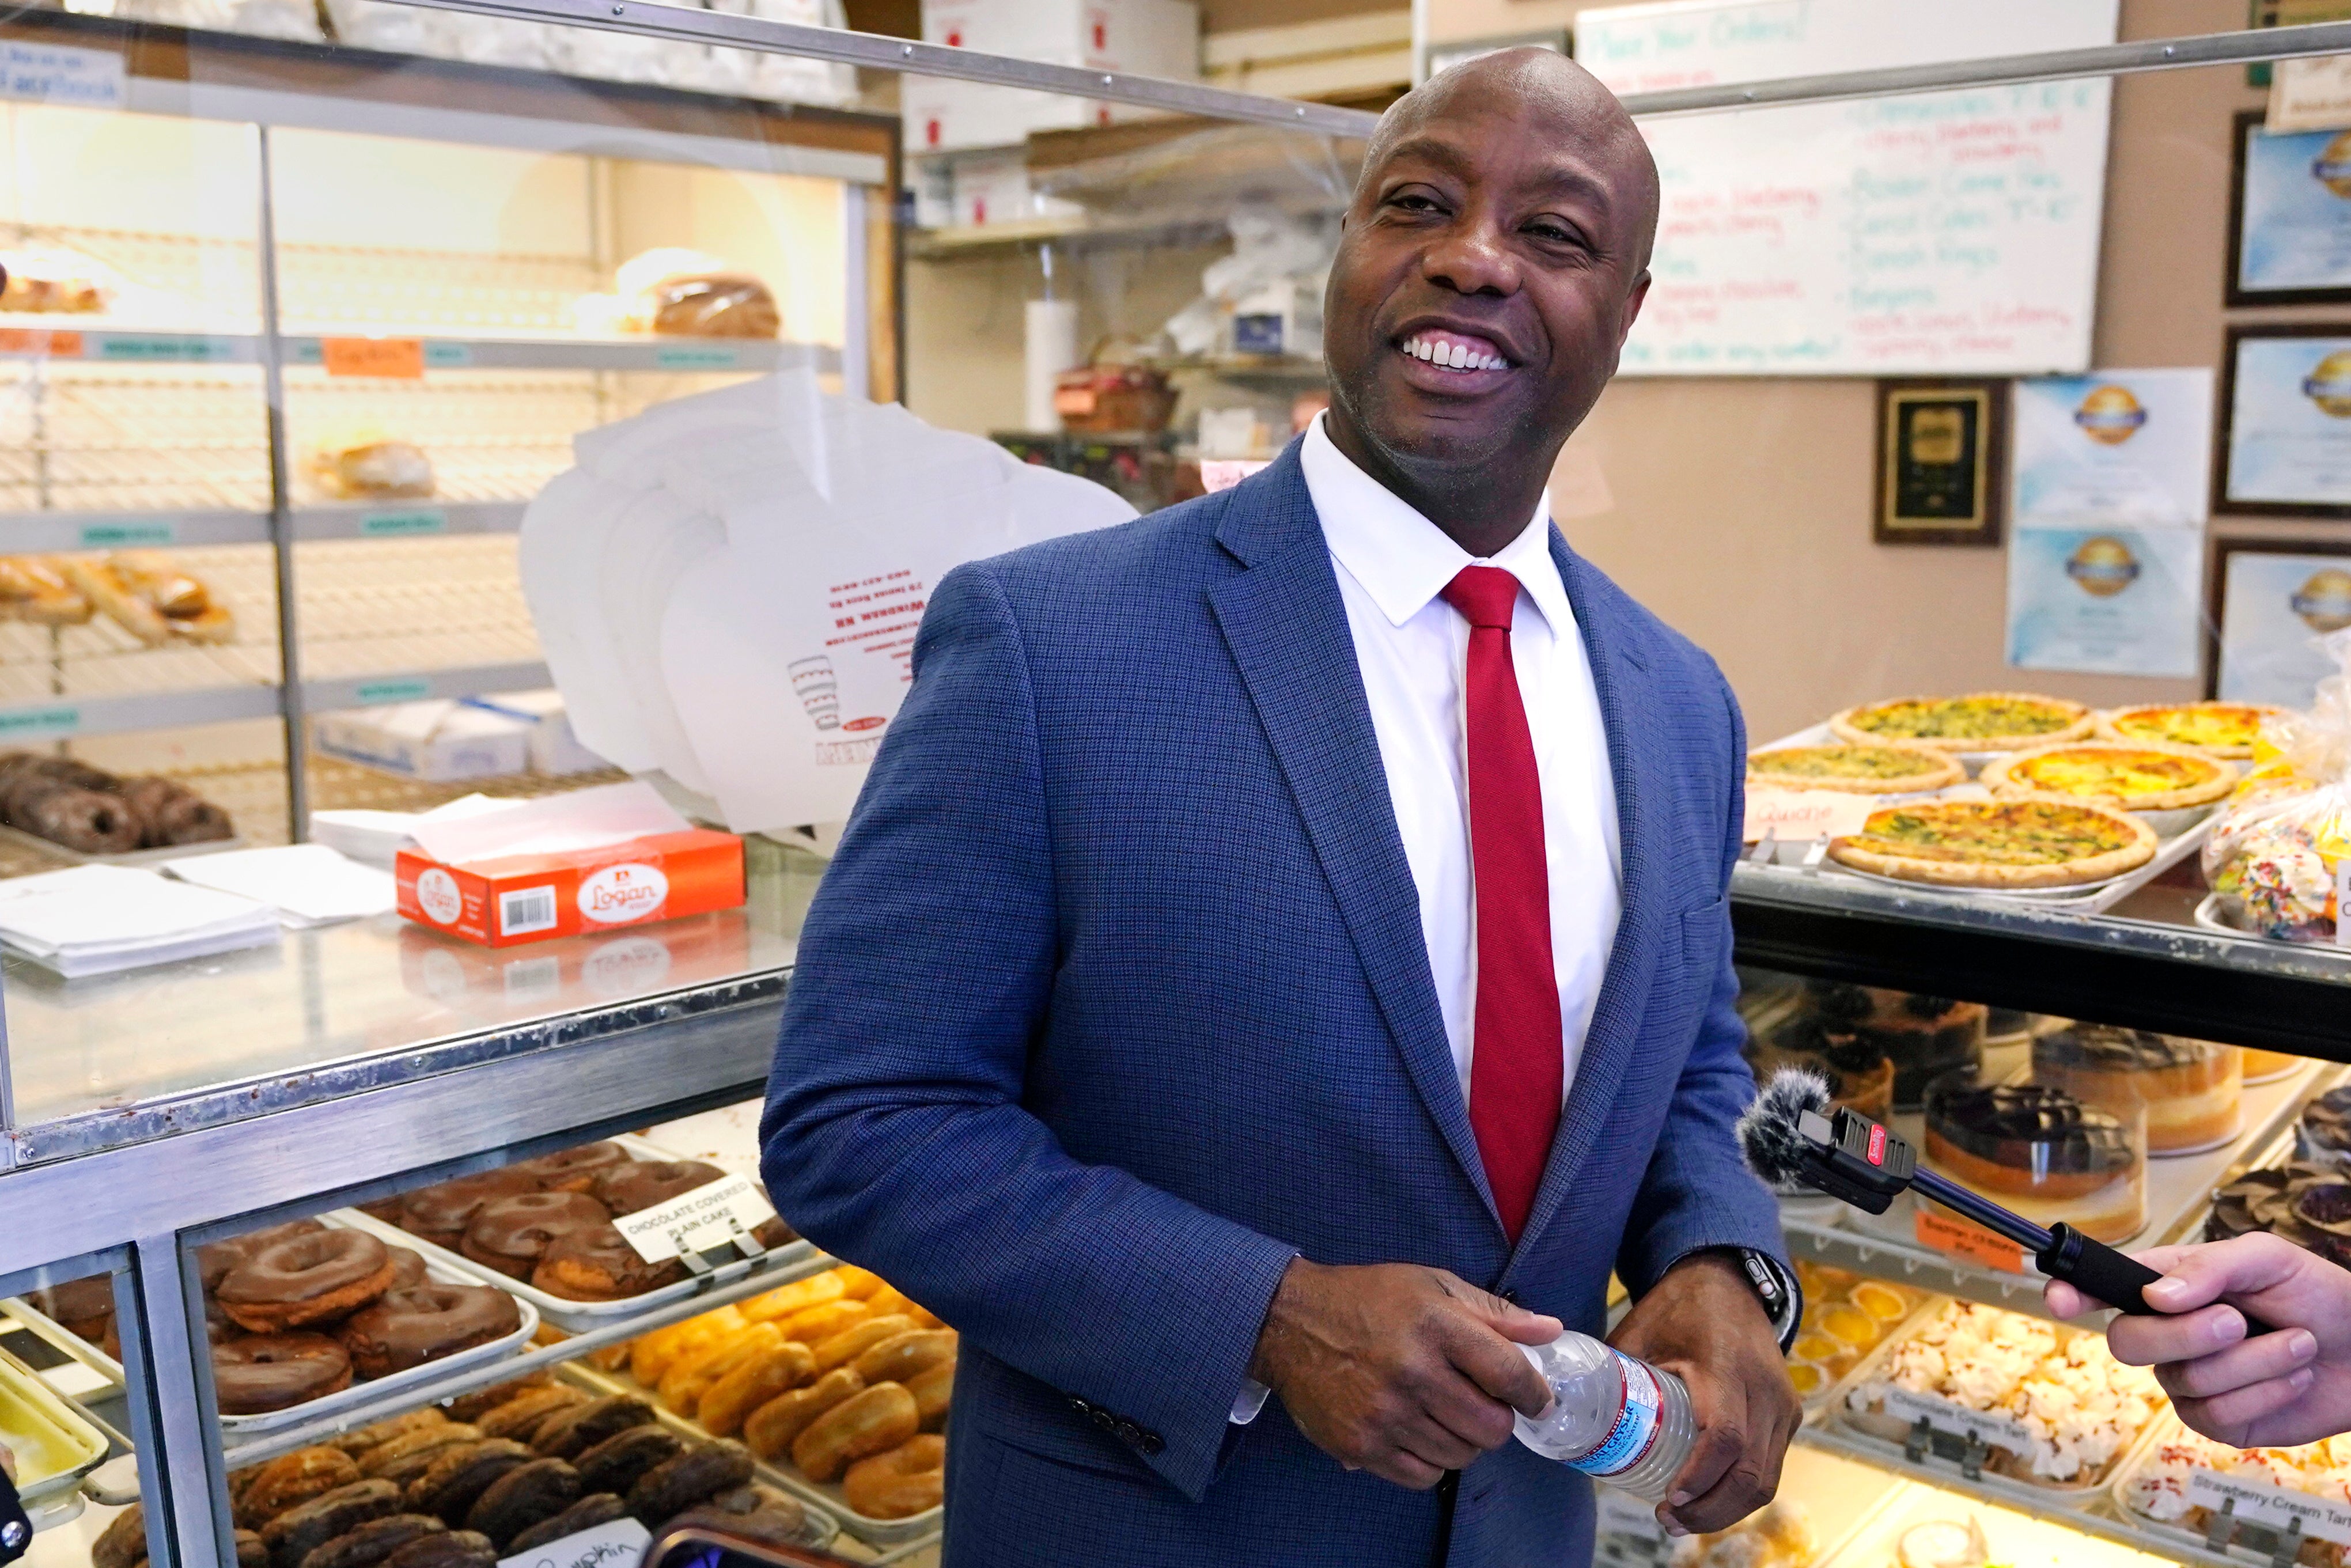 Tim Scott said workers who strike should be fired